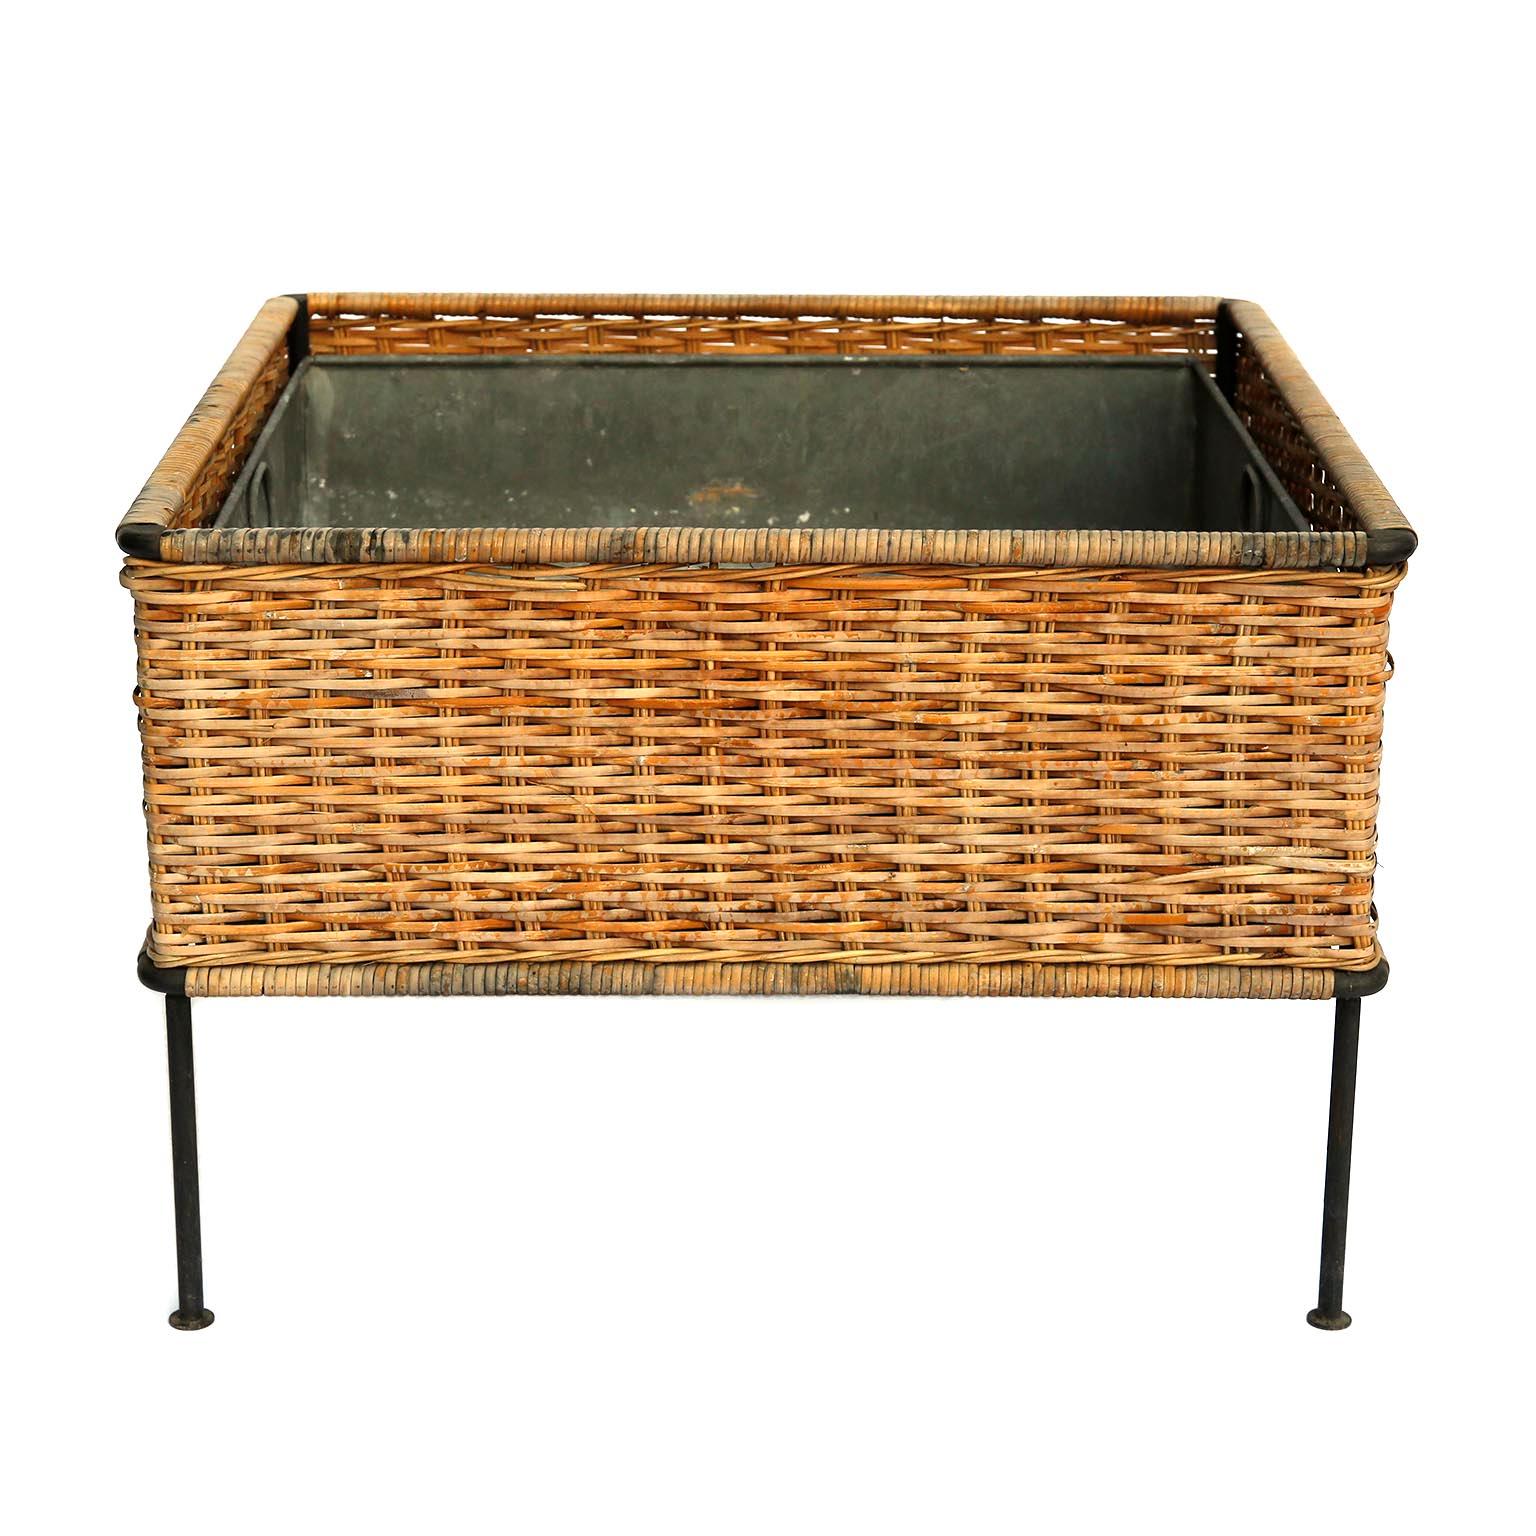 A planter with the original cane, wicker, and internal liner in zinc and a black painted metal frame designed by Carl Auböck, manufactured by Carl Auböck workshop in midcentury, circa 1950.
The aged cane and wicker is in good condition. The liner